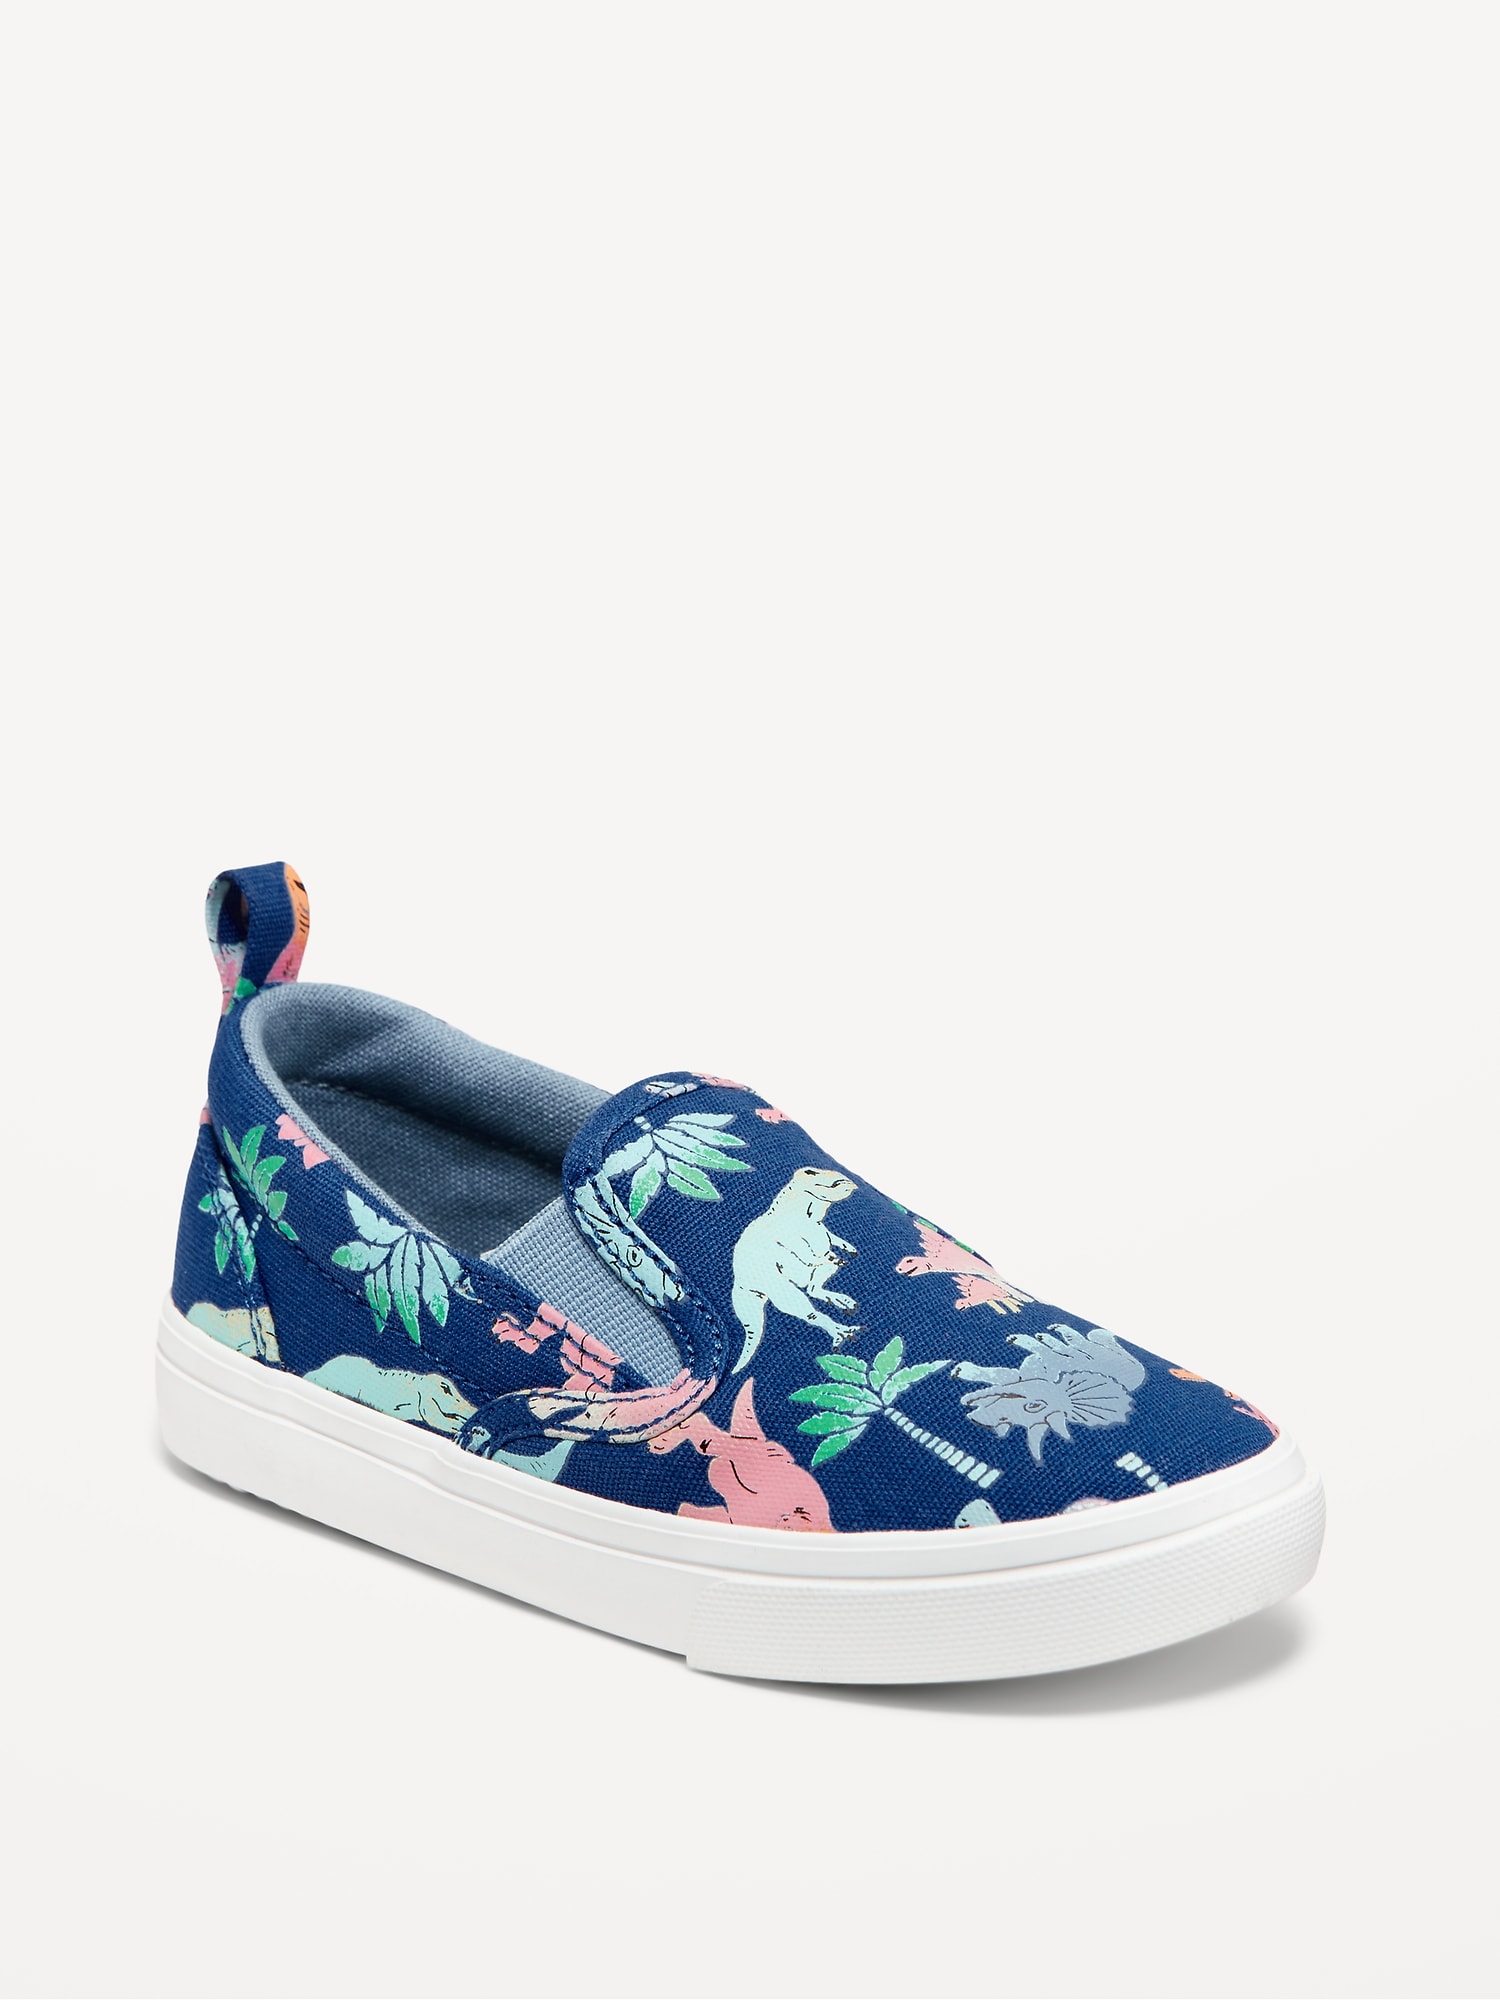 Canvas Slip-On Sneakers for Toddler Boys | Old Navy